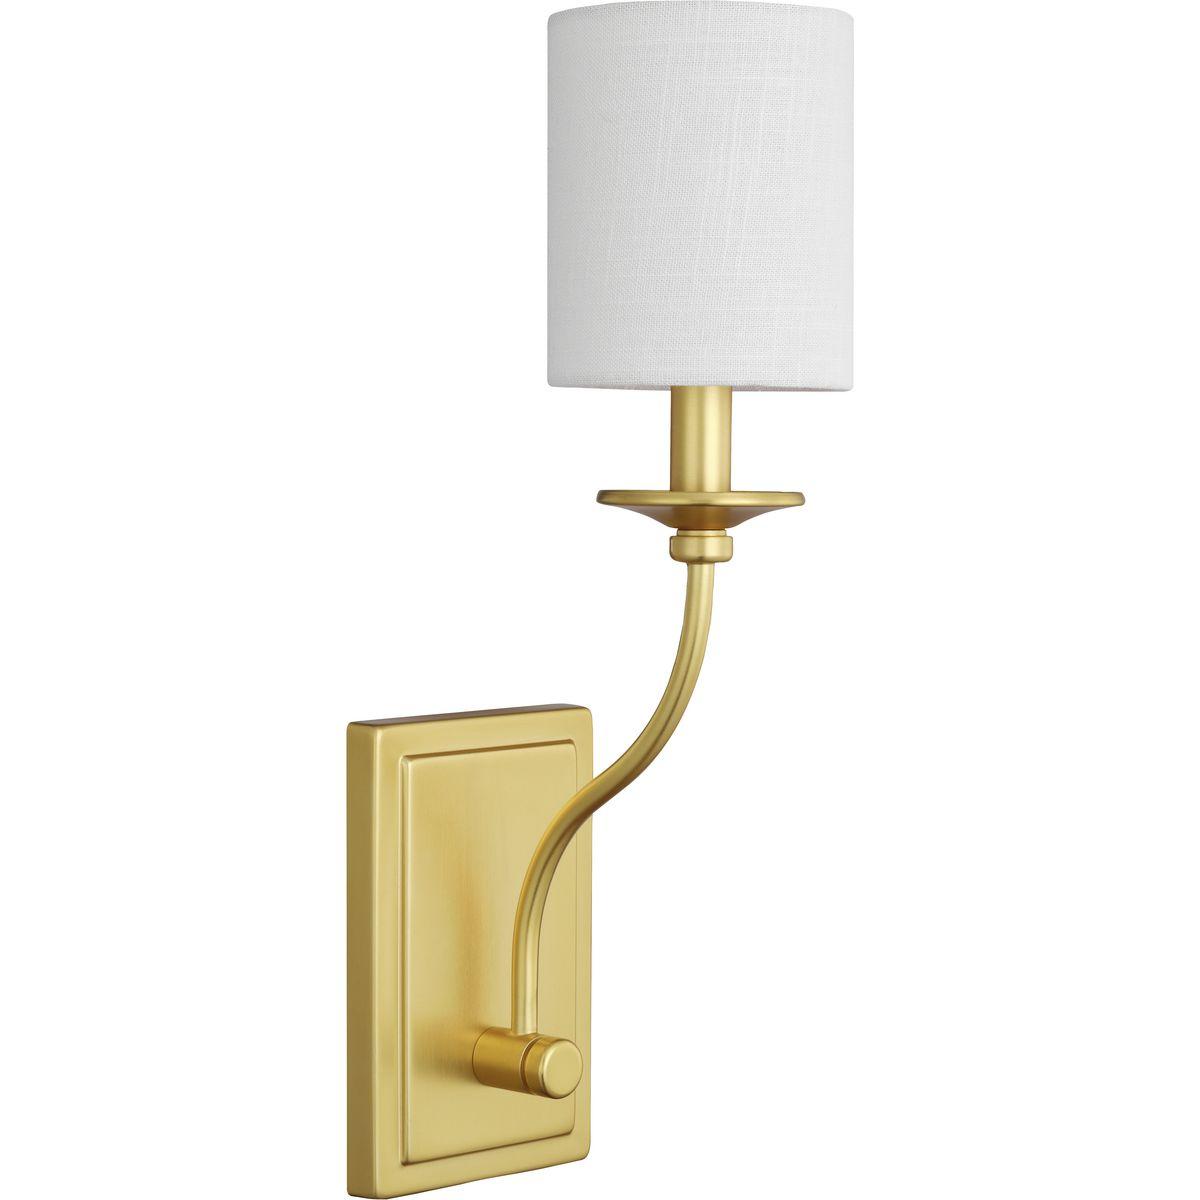 Hubbell P710018-012 Inspired at its roots by an understated beauty and a breathtaking formal elegance, this wall sconce will make a stunning addition to any luxurious living space. A satin brass arm flows down from an ornamental light base to a rectangular backplate. On top 